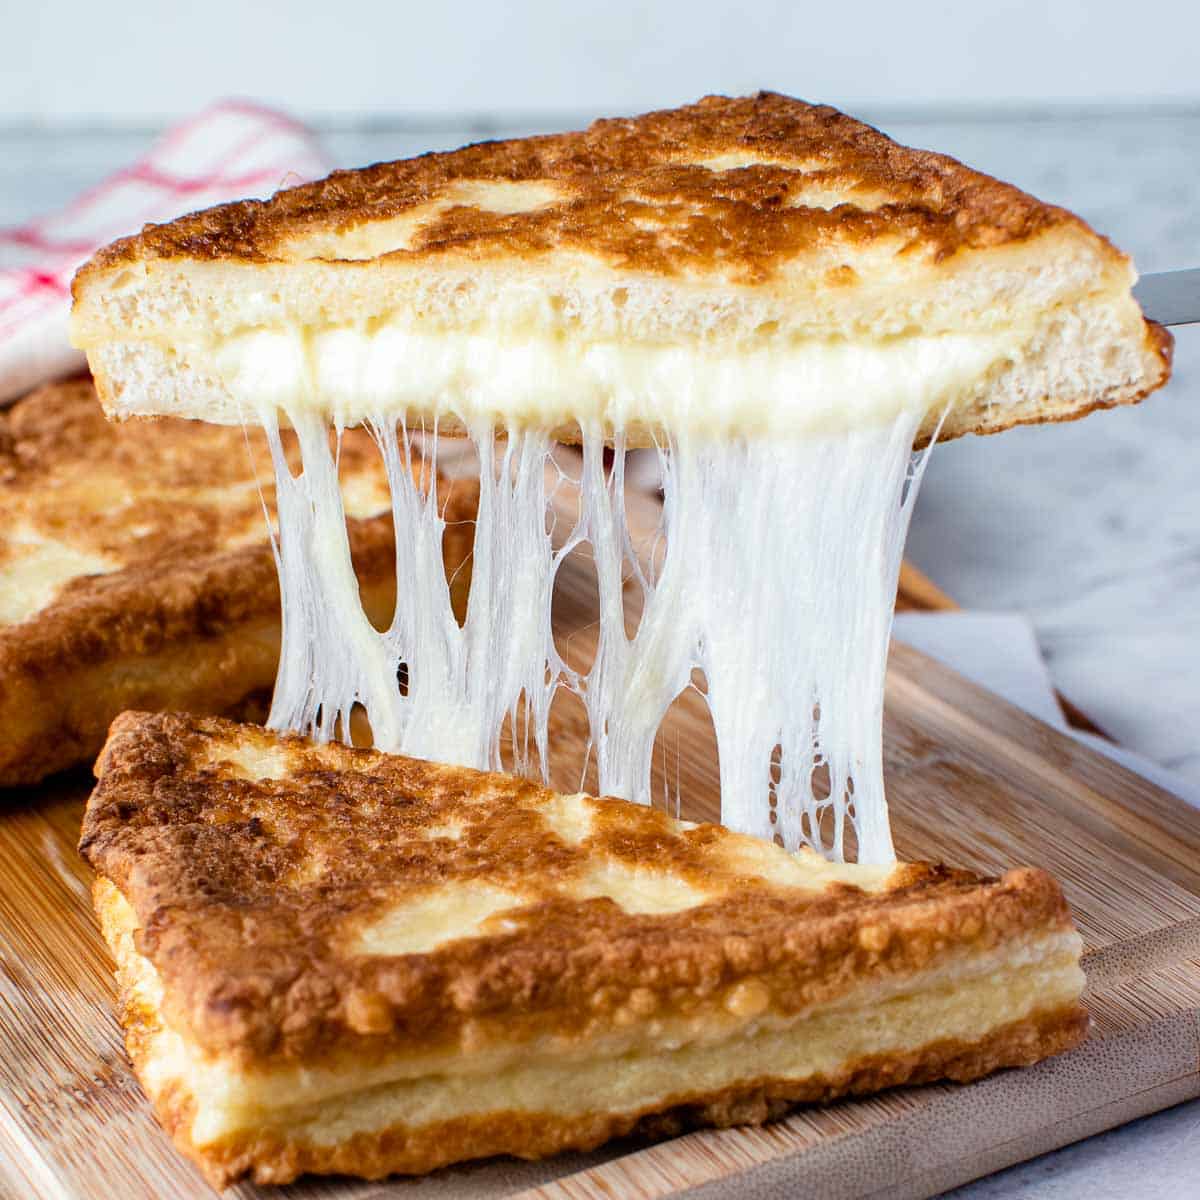 fried cheese sandwich cut in half and showing cheese pull.